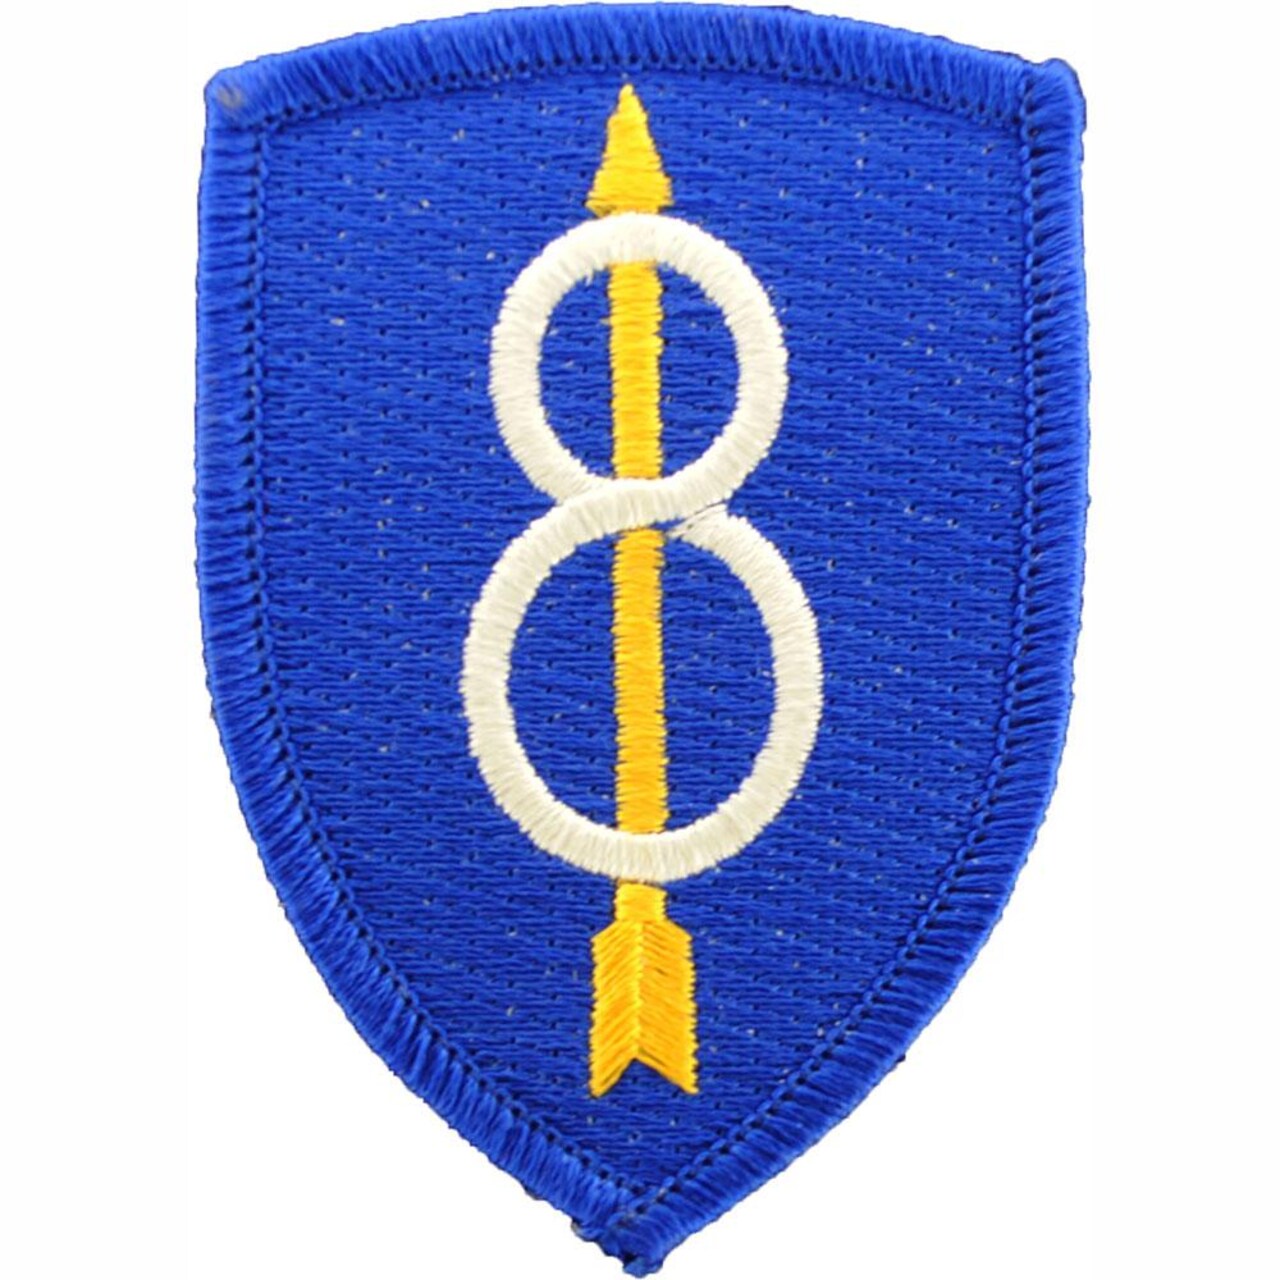 U.S. Army 8th Infantry Division Patch